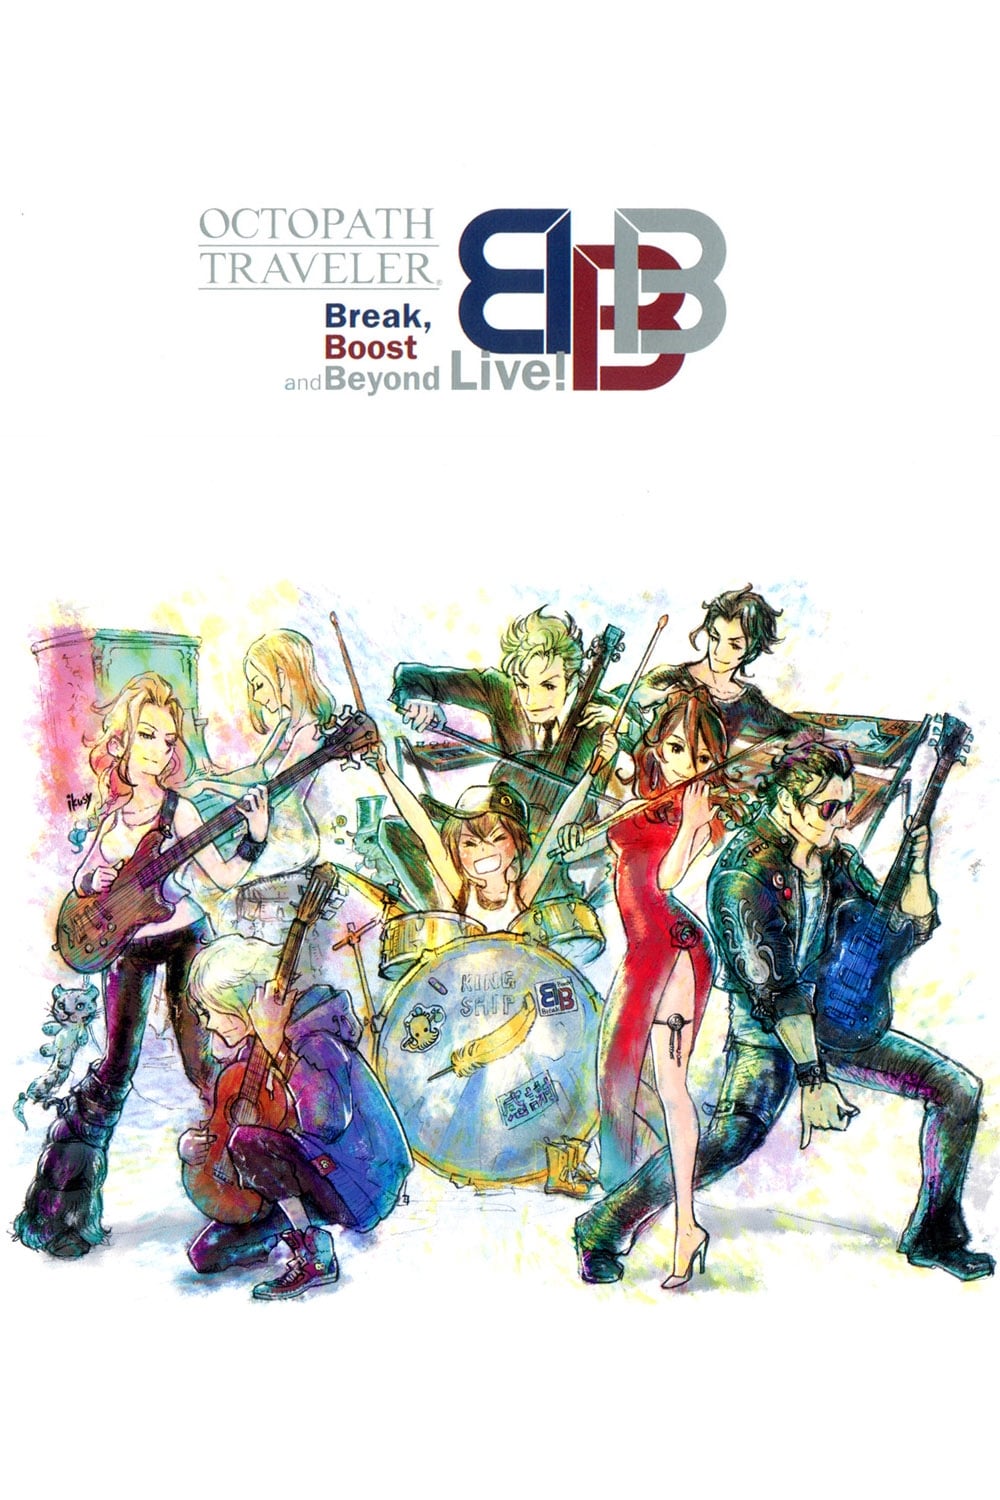 OCTOPATH TRAVELER Break, Boost and Beyond Live!